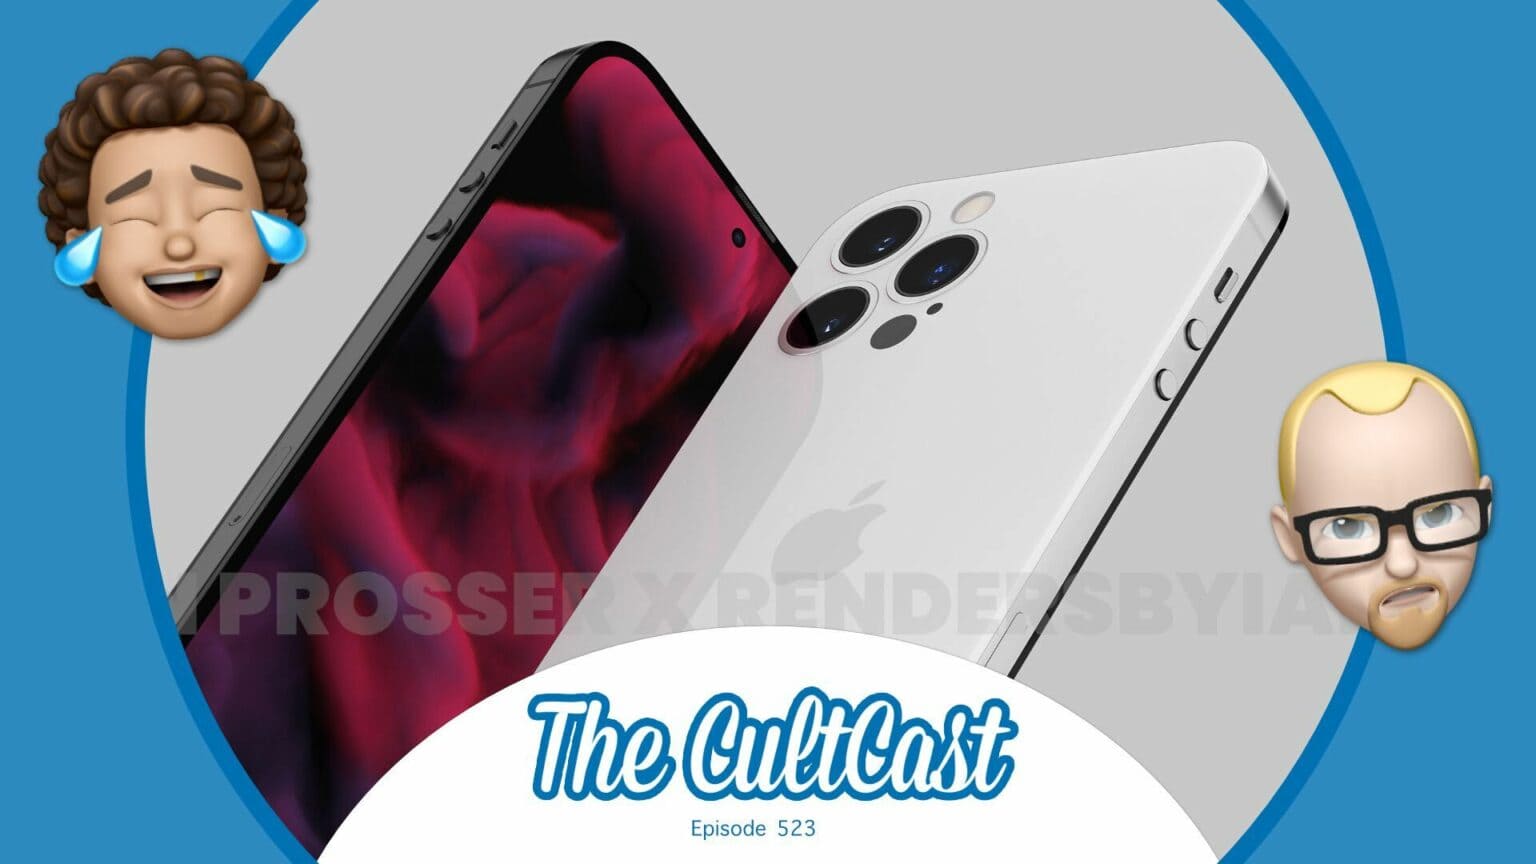 The CultCast, a weekly Apple podcast: New iPhone 14 rumors get us excited about 2022.